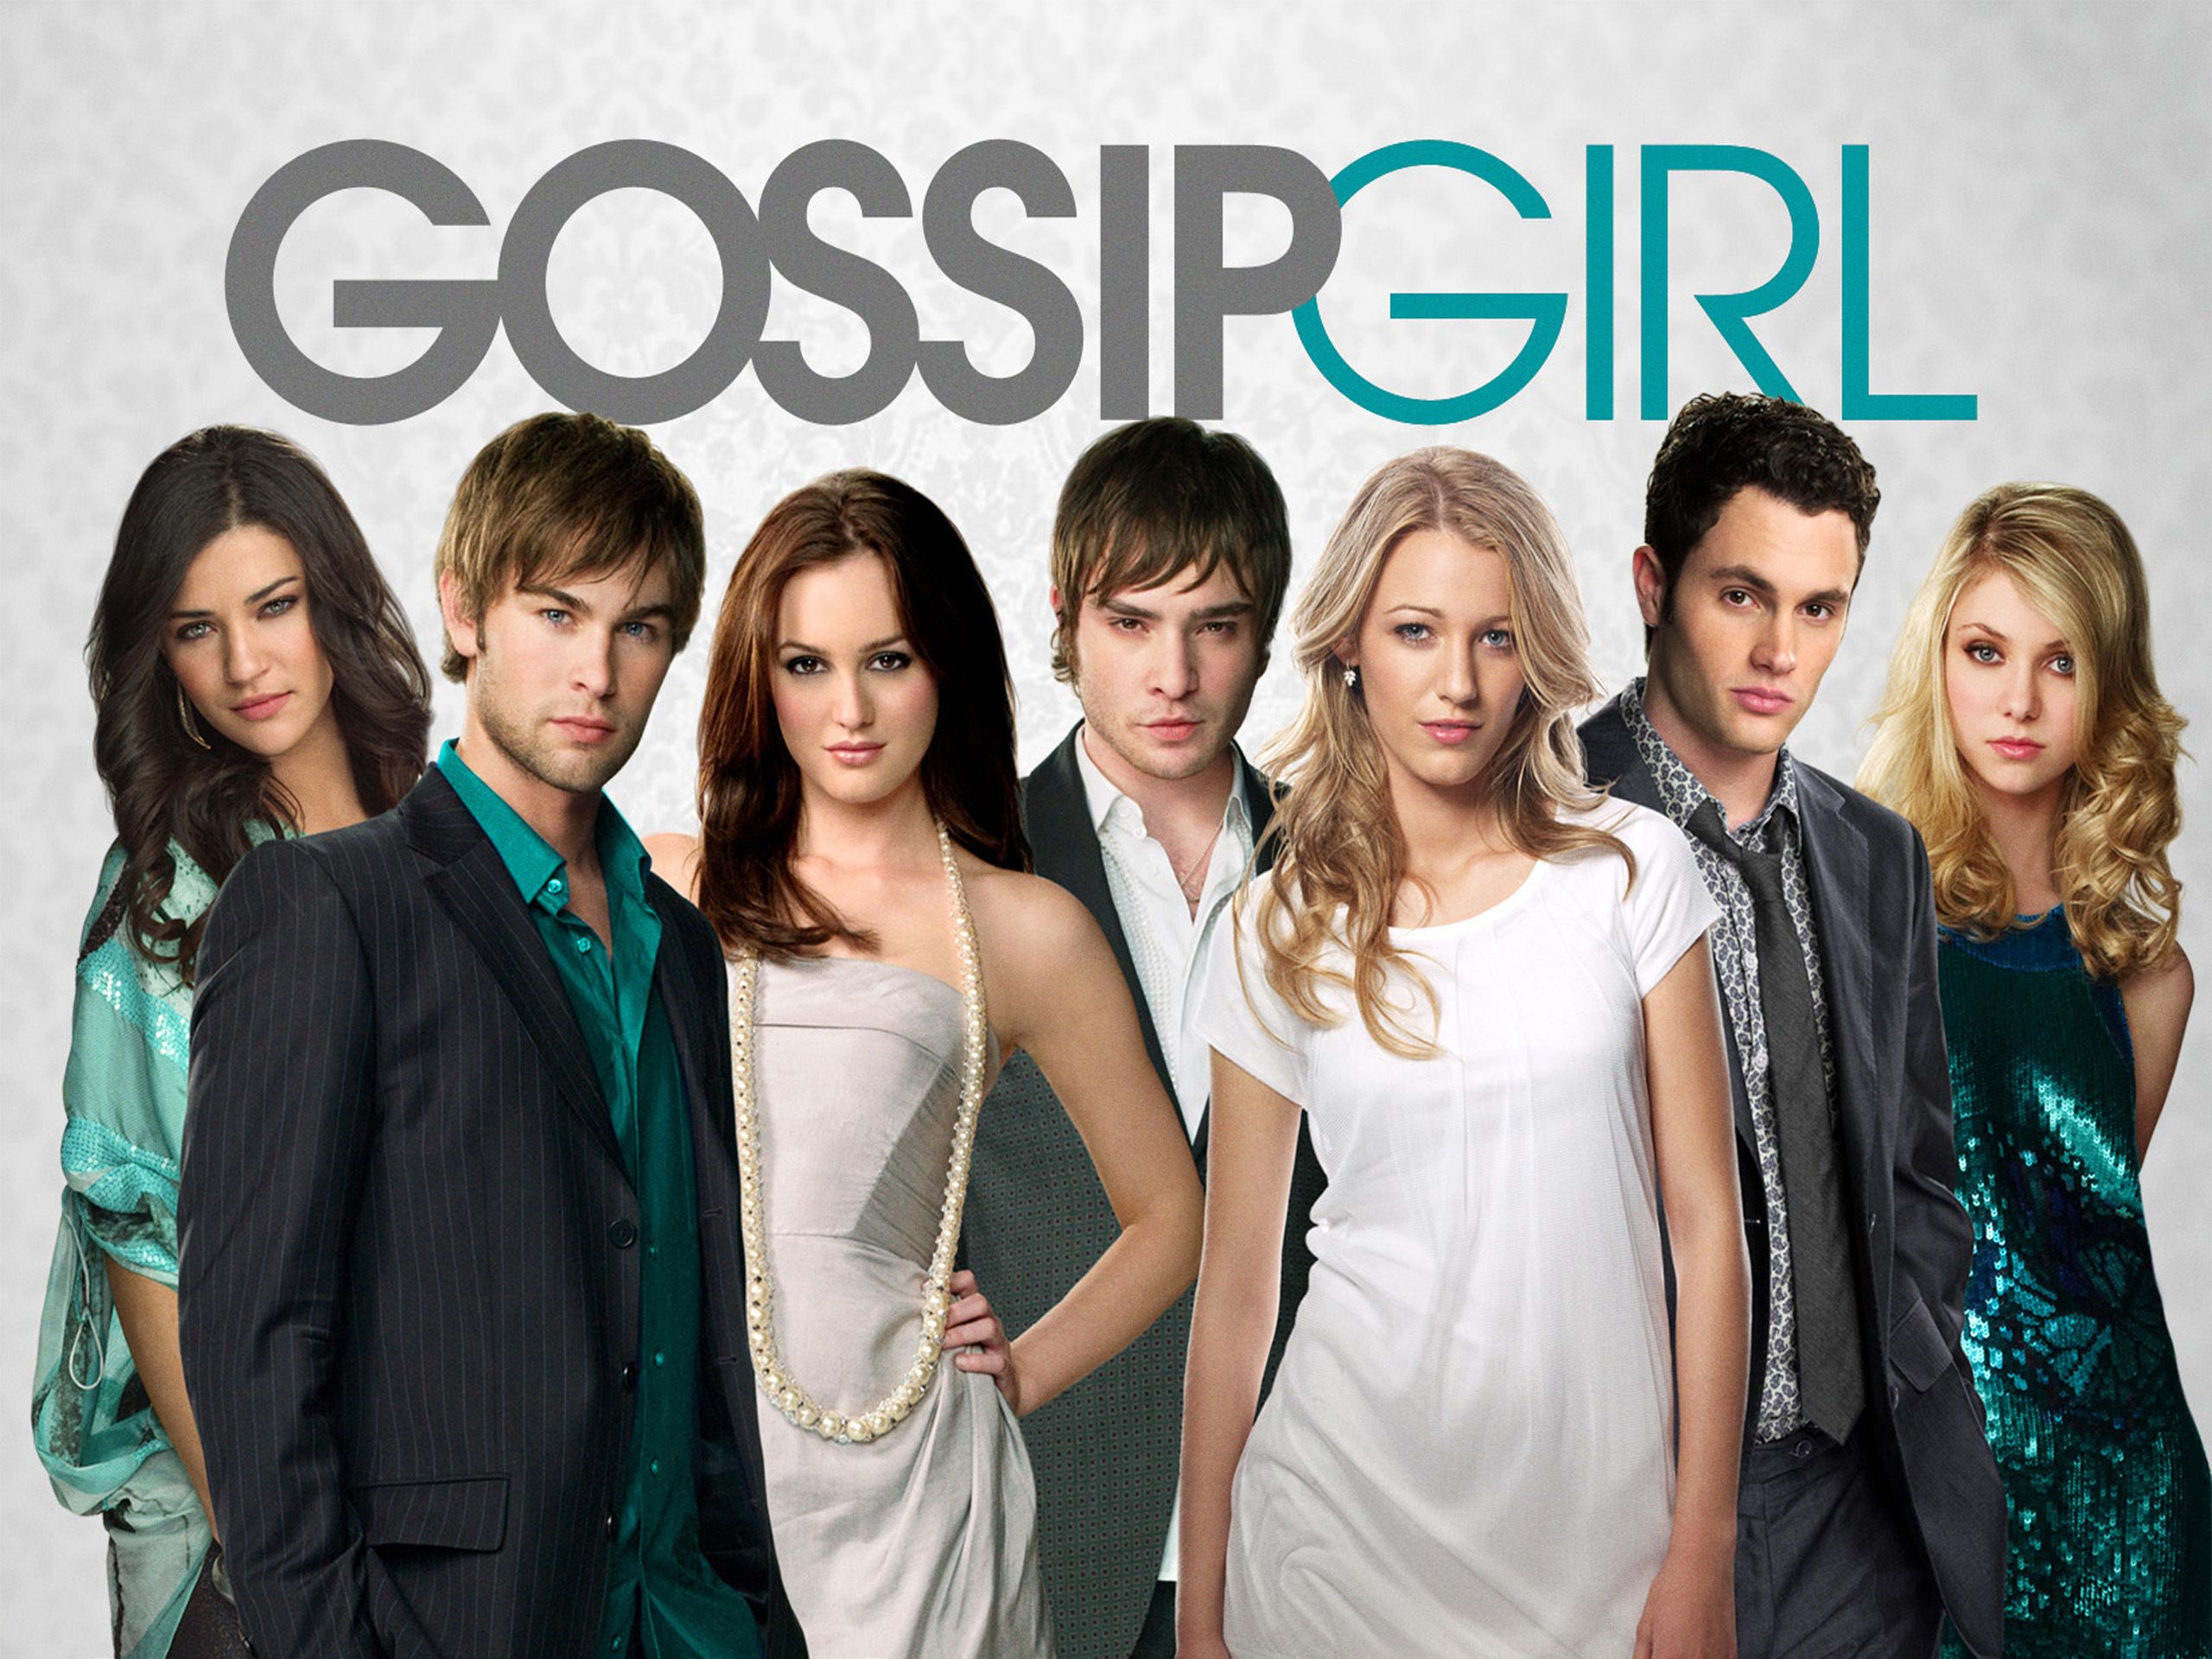 Gossip Girl | Free Desktop Wallpapers for HD, Widescreen and Mobile